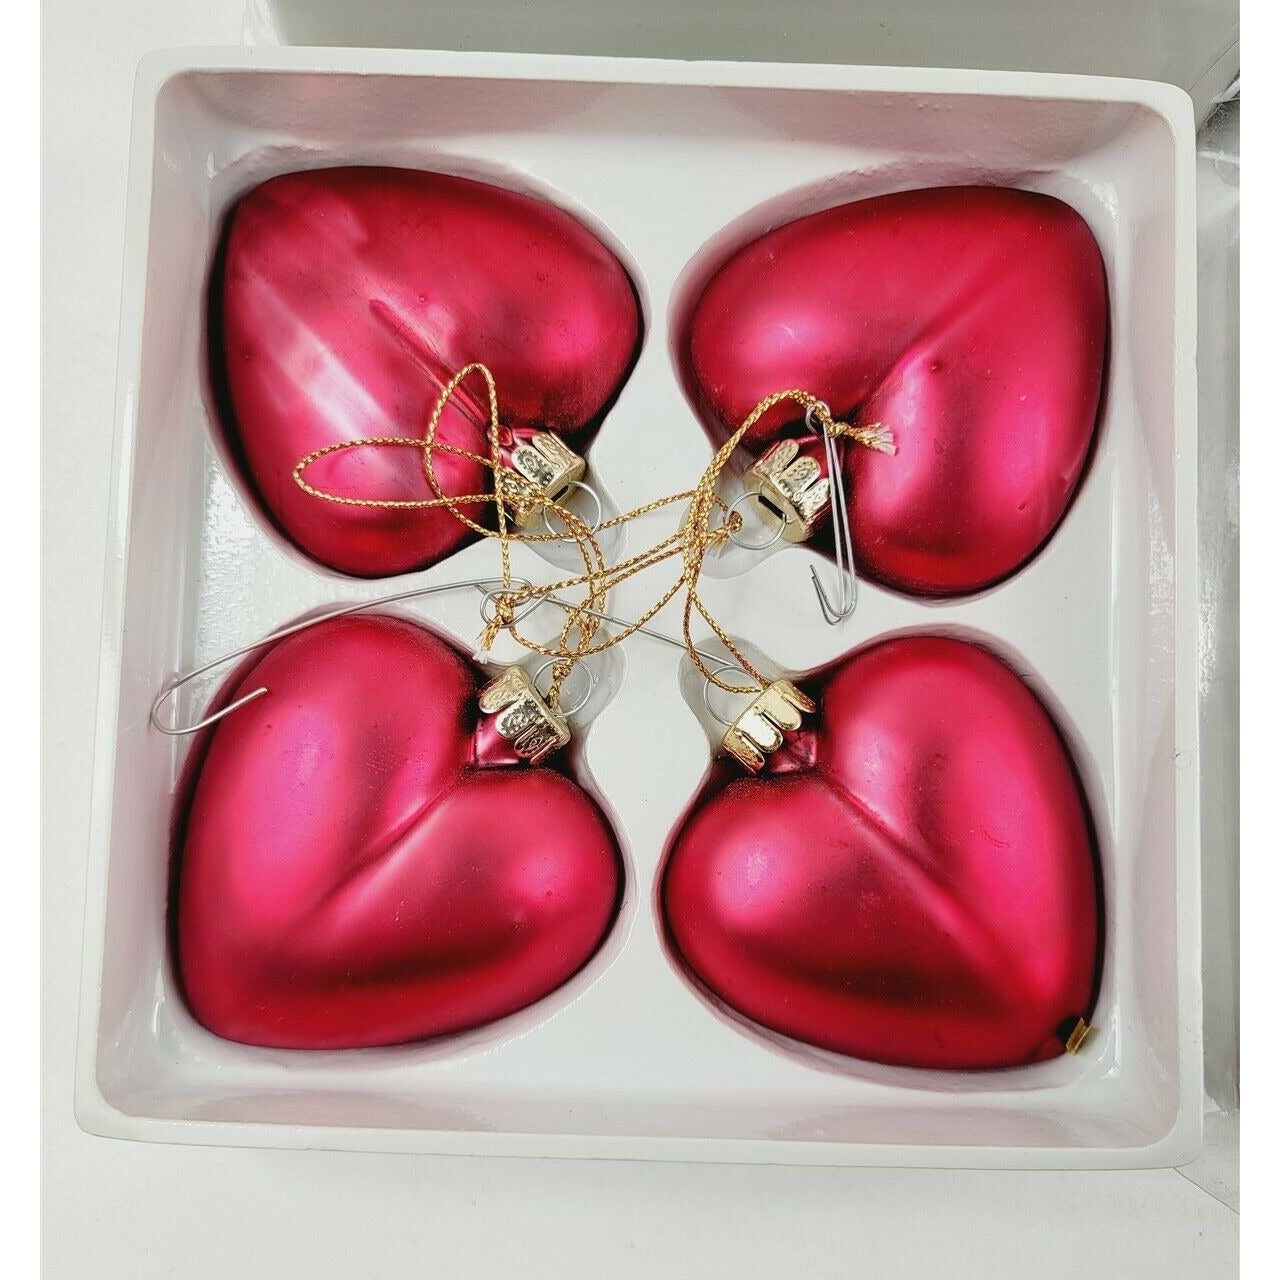 24 Vintage Heart Shaped Blown Glass Christmas Ornaments Gold Red Green White